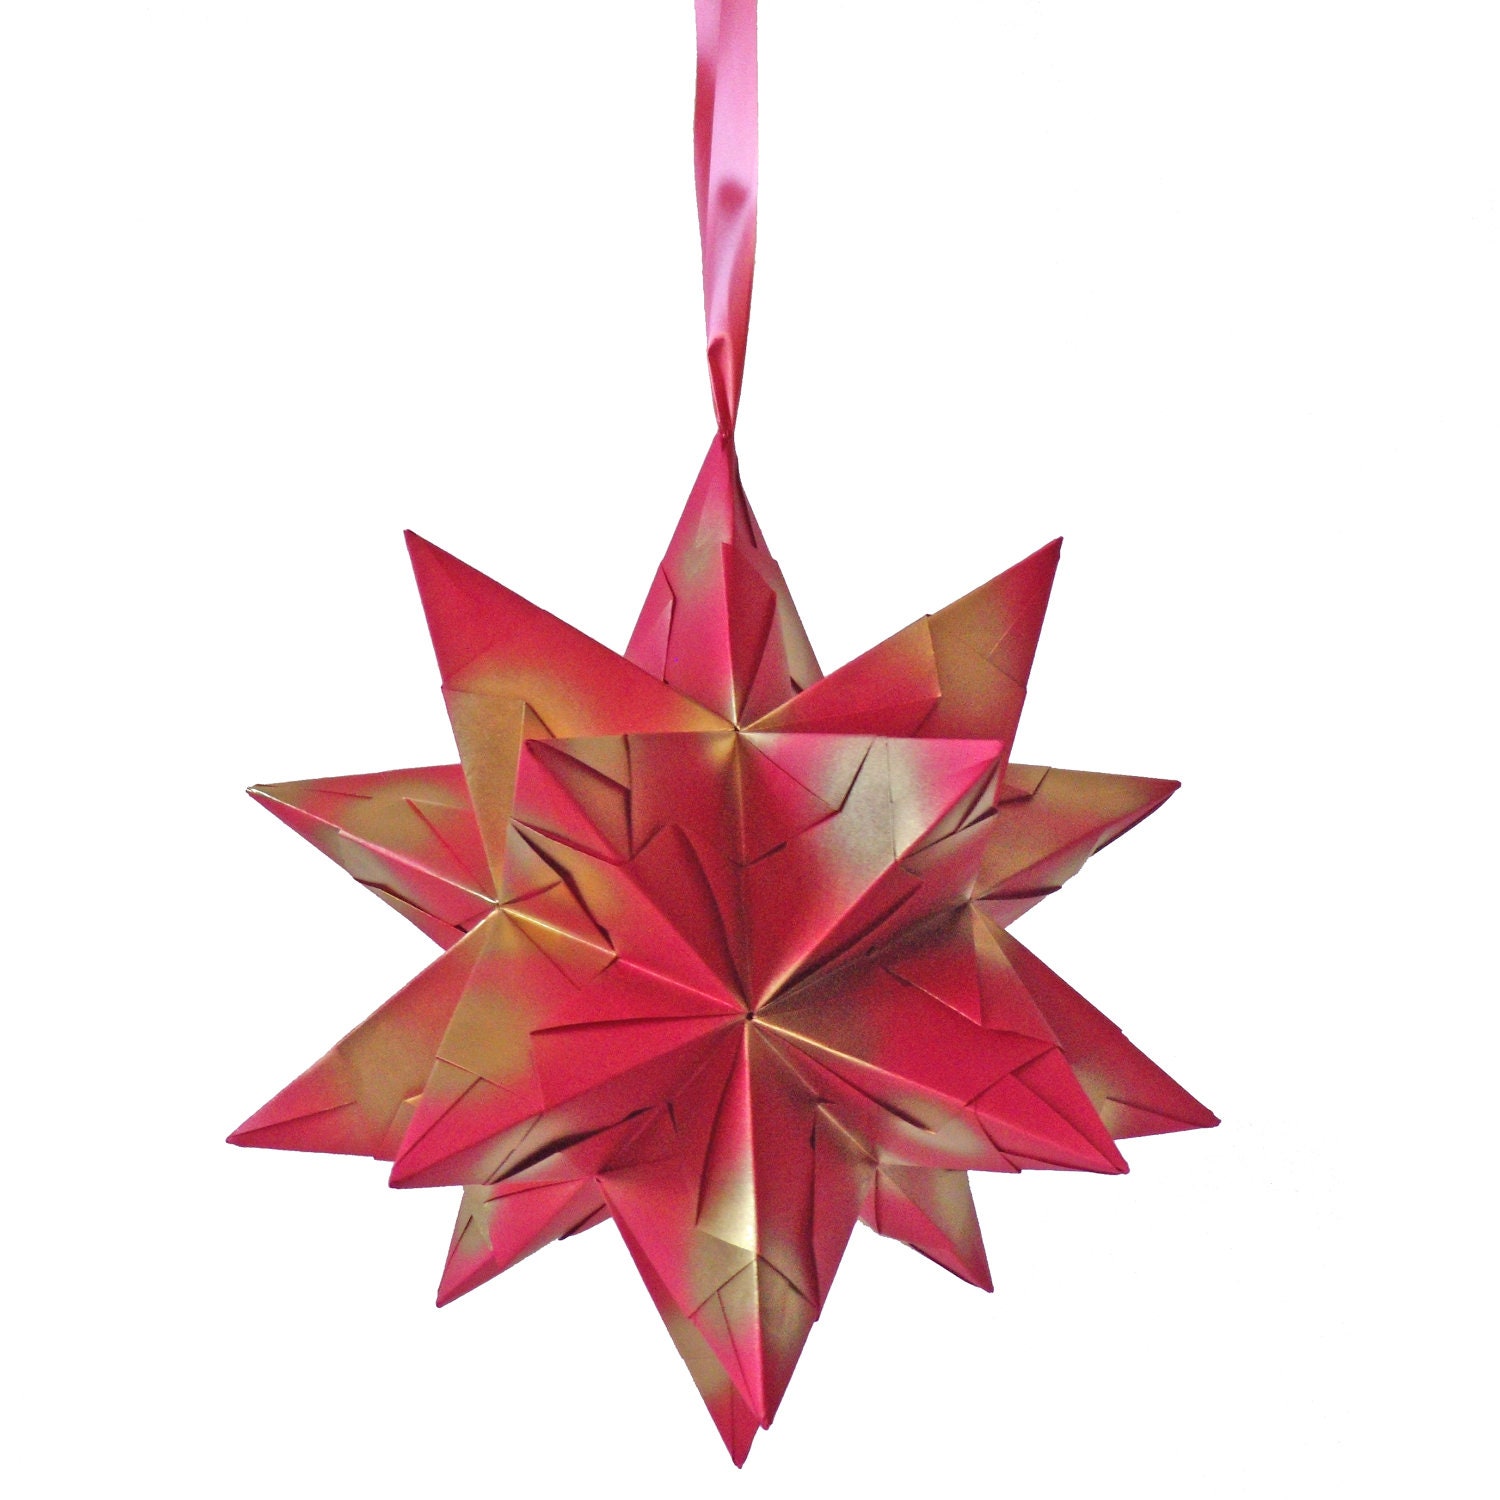 Christmas ornament, Paper star origami, Christmas decorations, handmade ornament, holiday decorations, 3D star